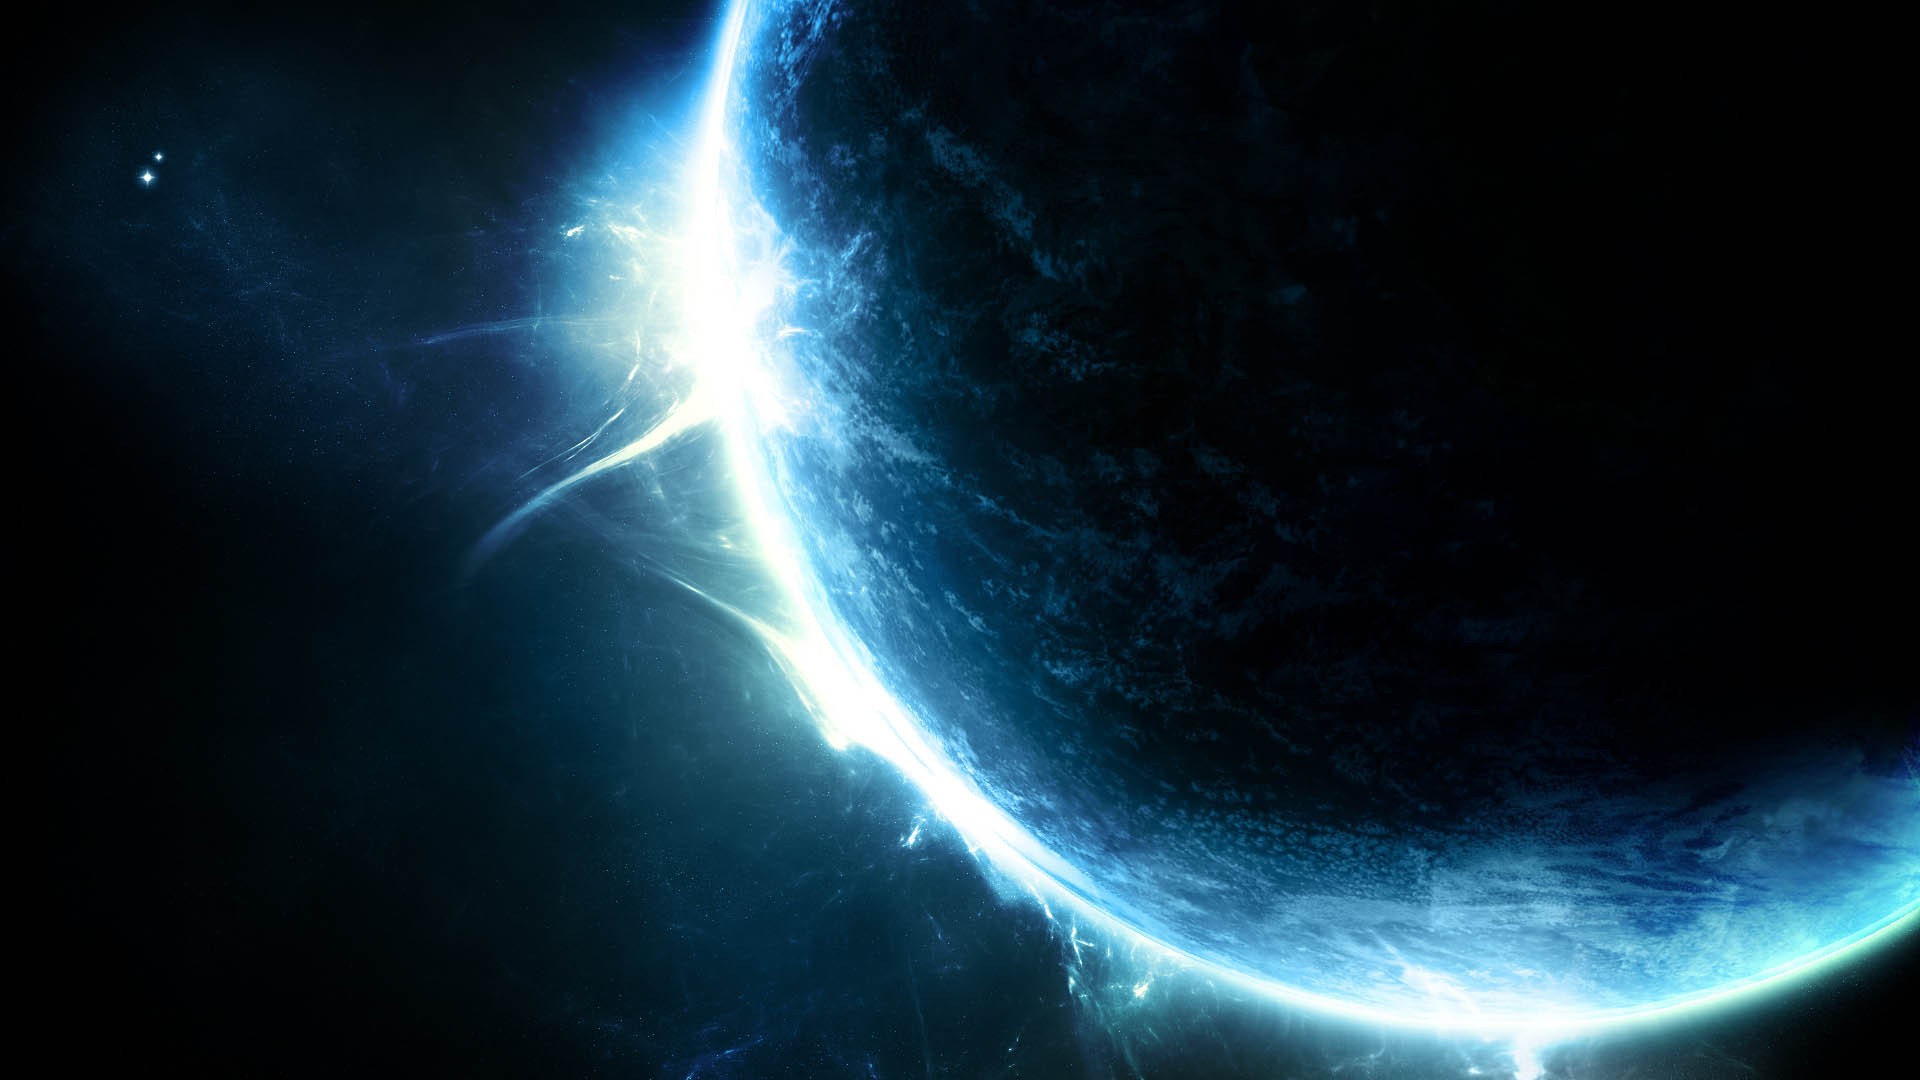 Full HD 1080p Space Wallpaper Desktop Background Blue And